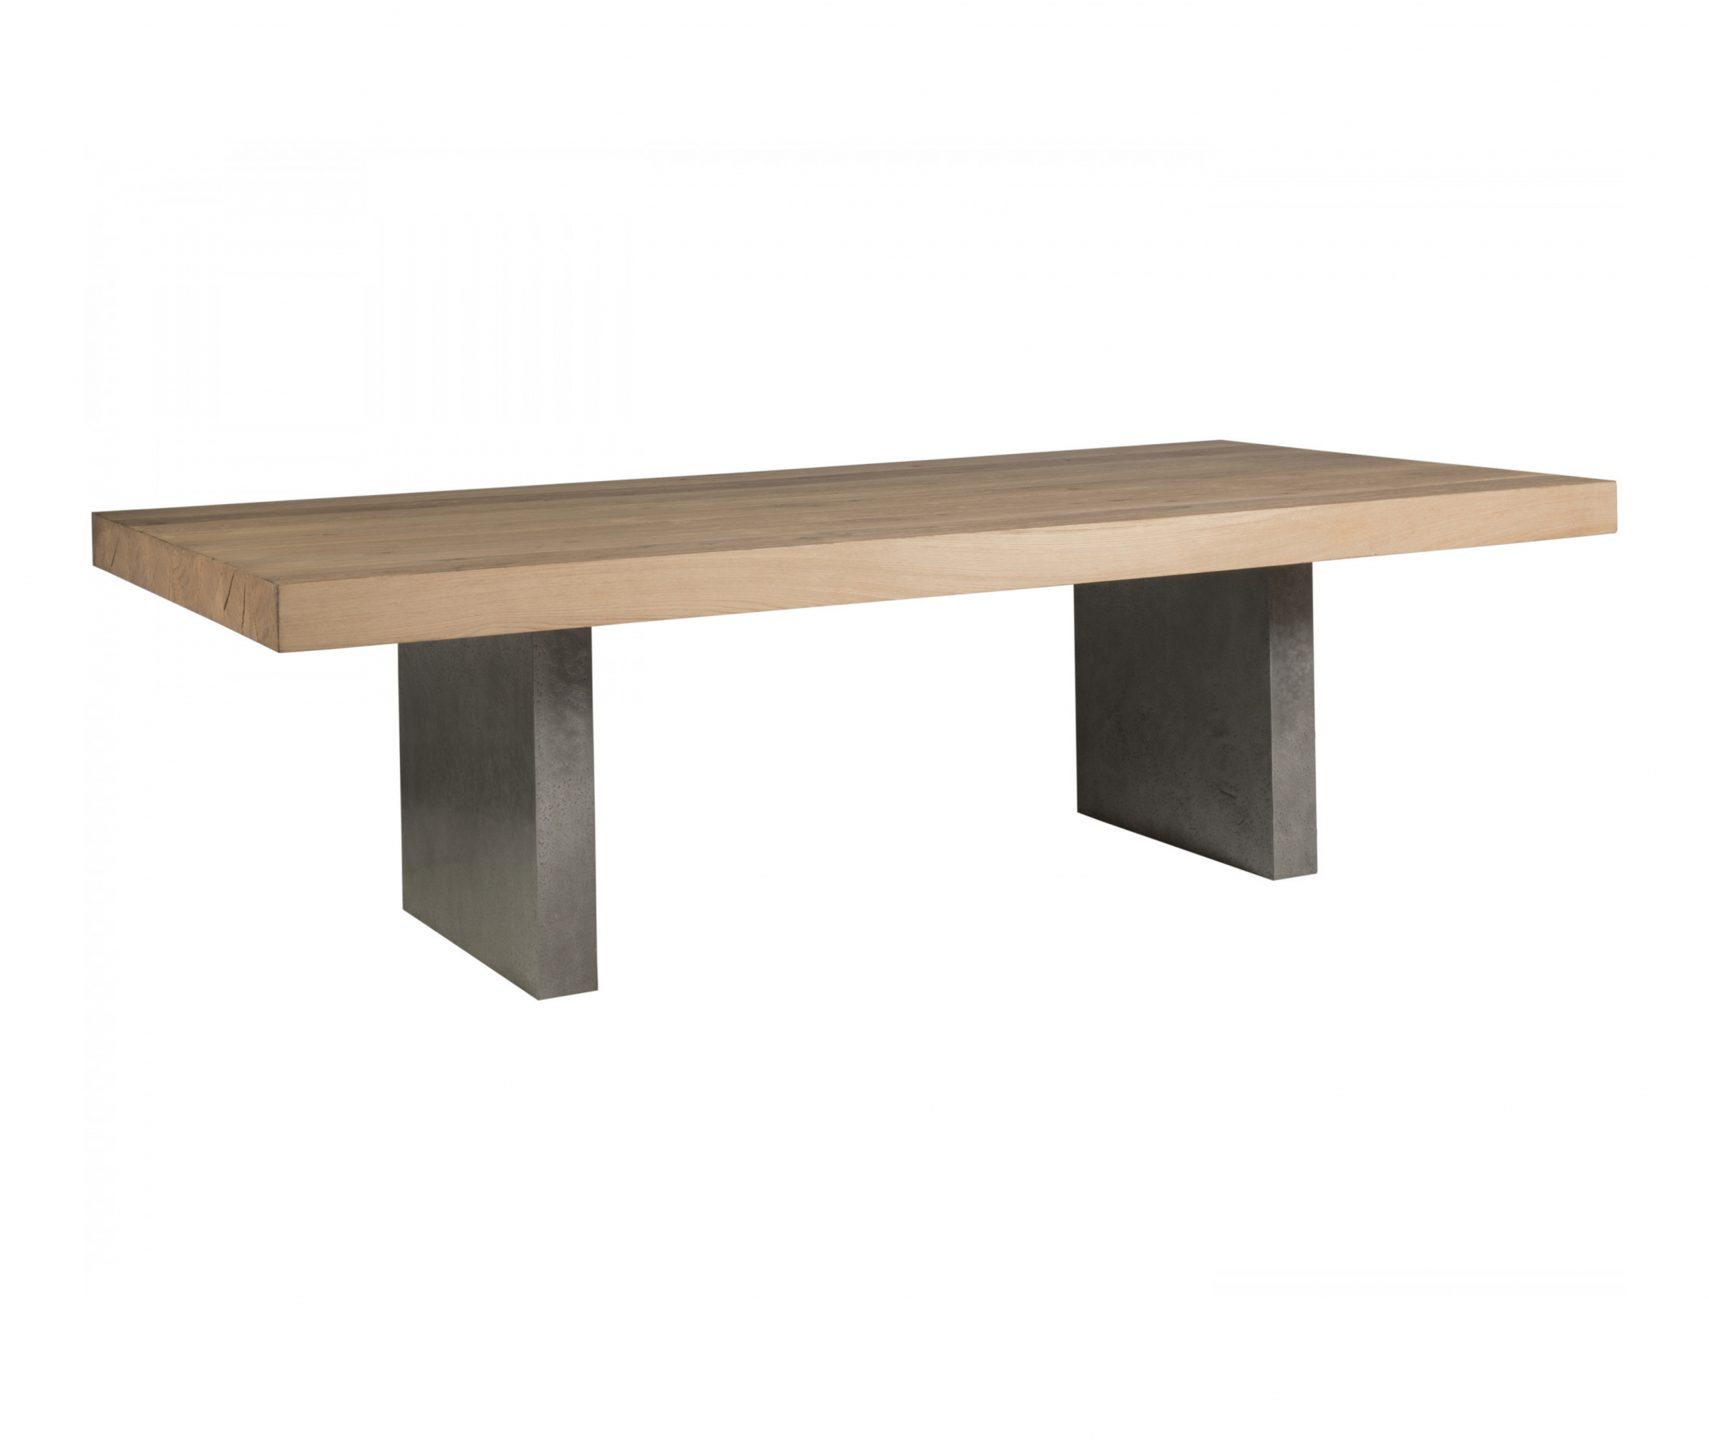 Lexington Home Brands_Verite Rectangle Dining Table 1_int_products